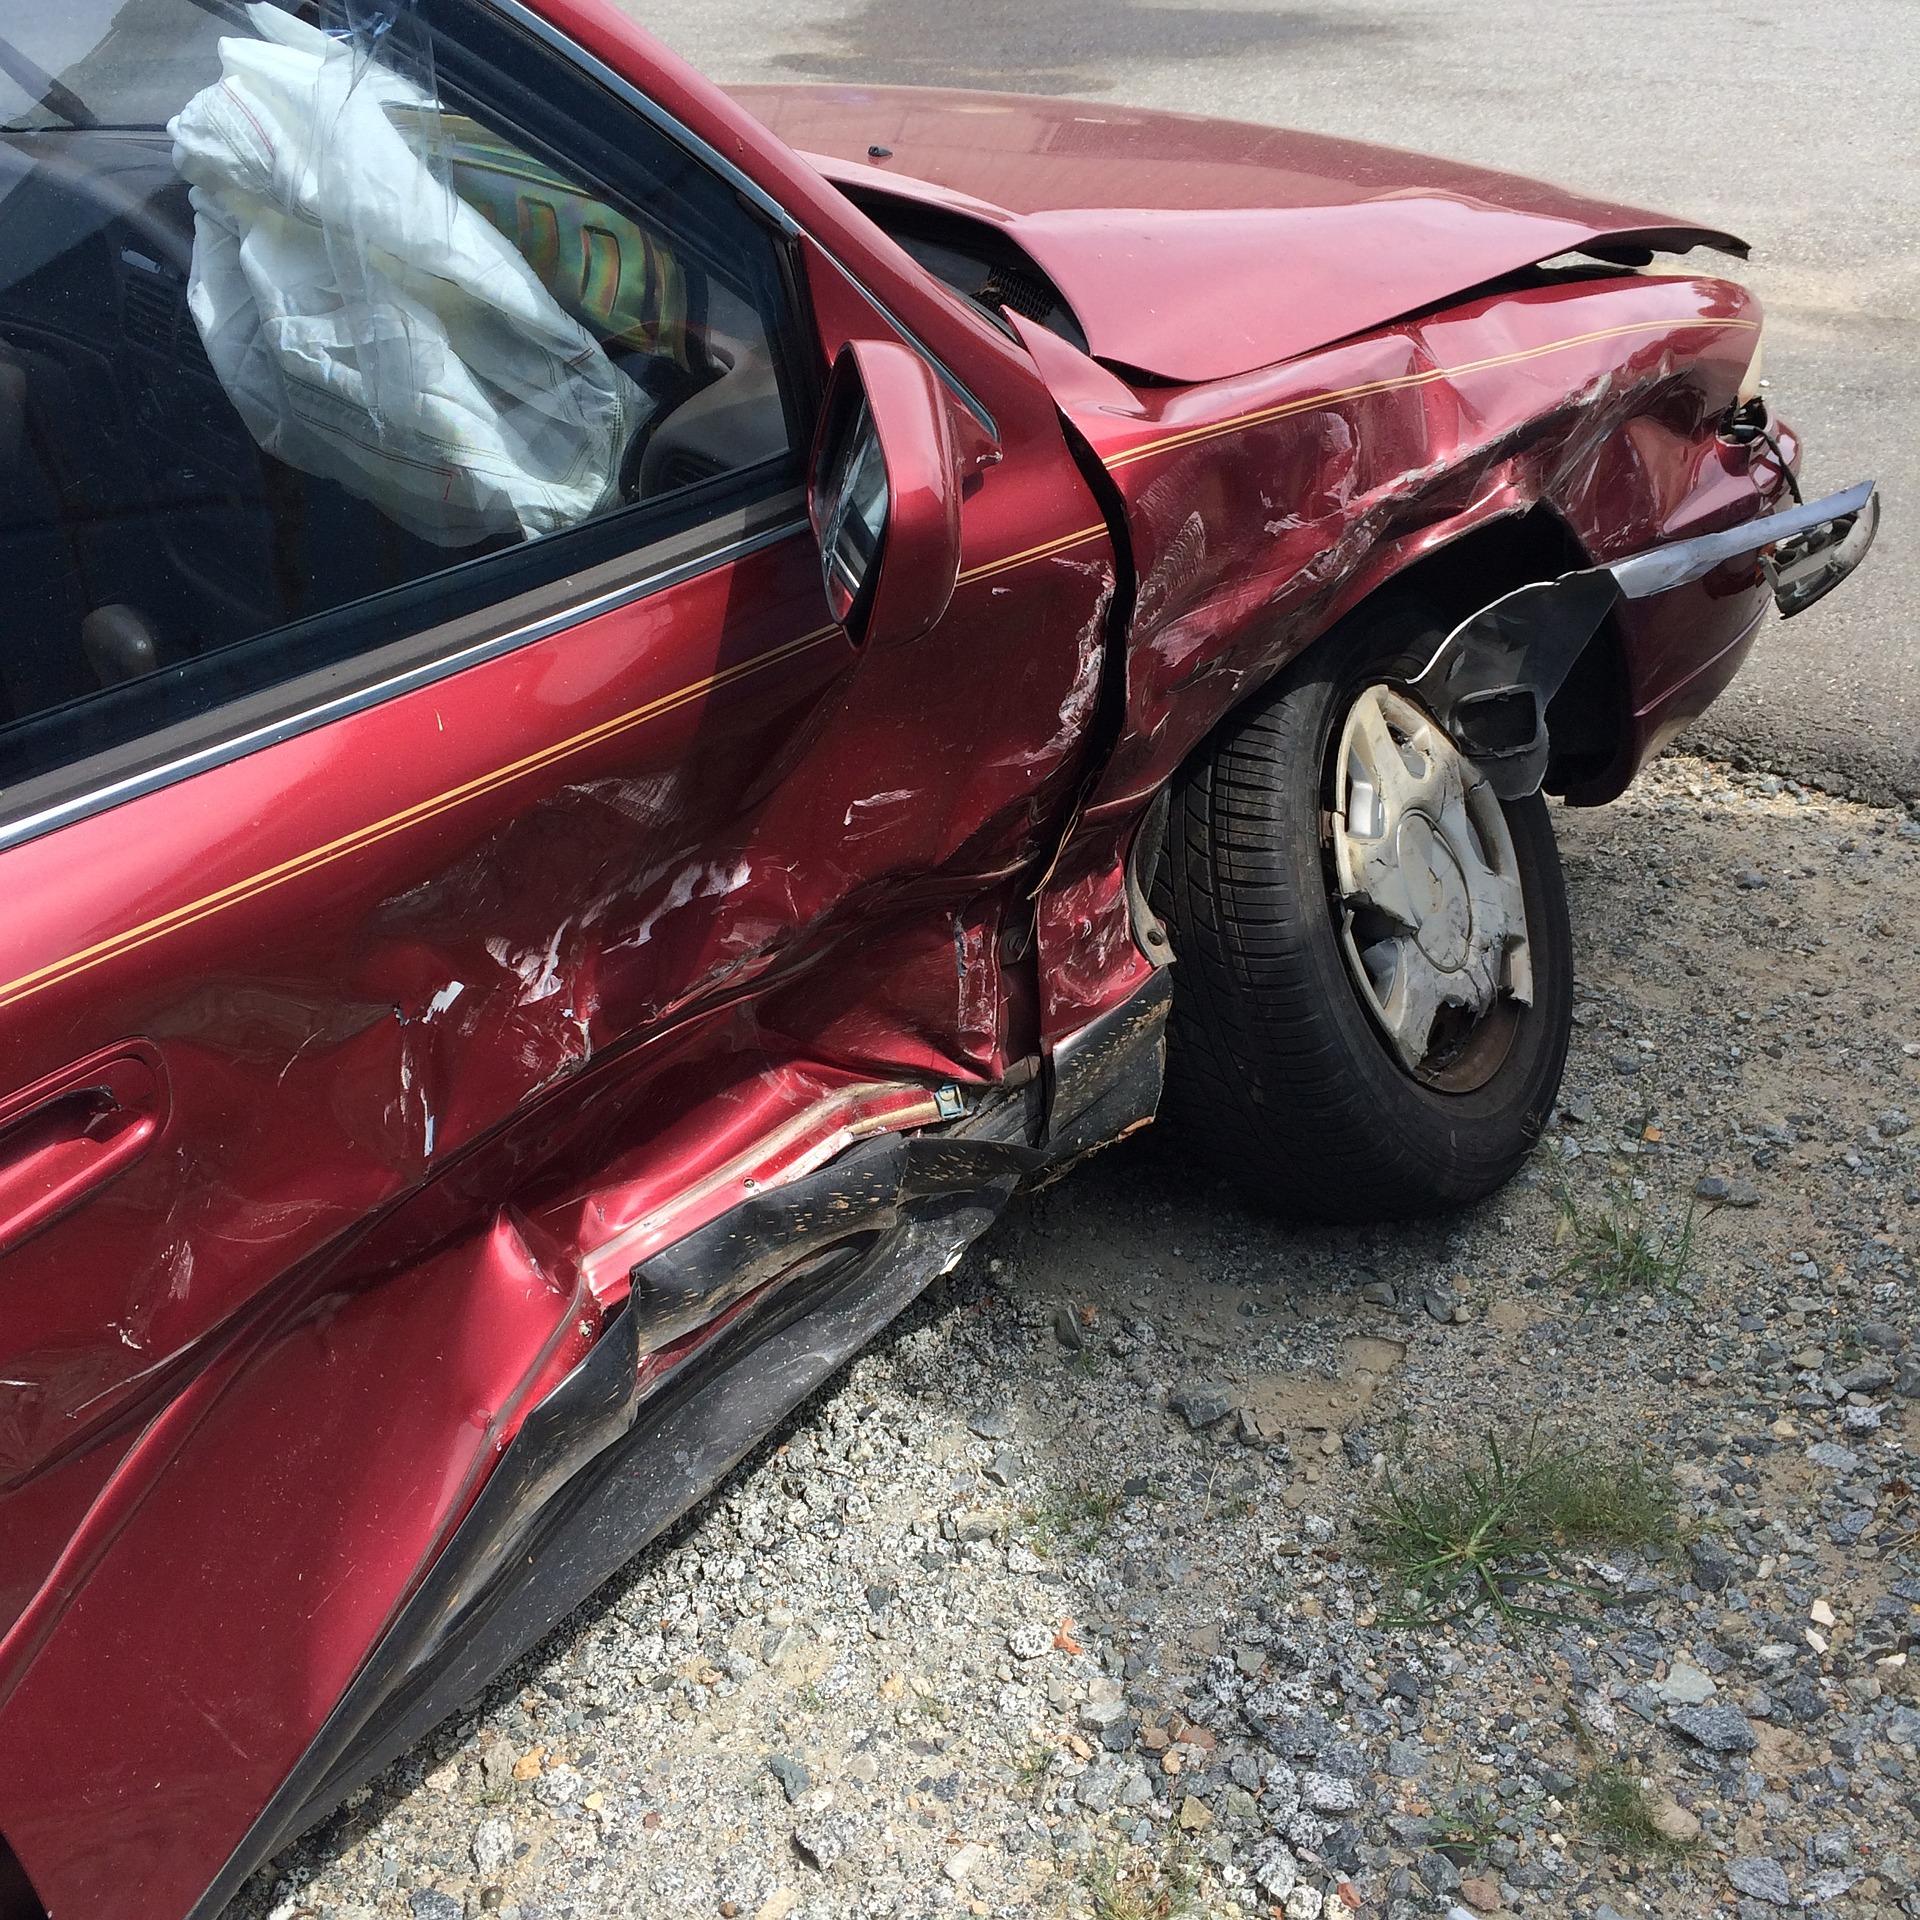 Charlotte Car Wreck: To What Damages Are You Entitled?